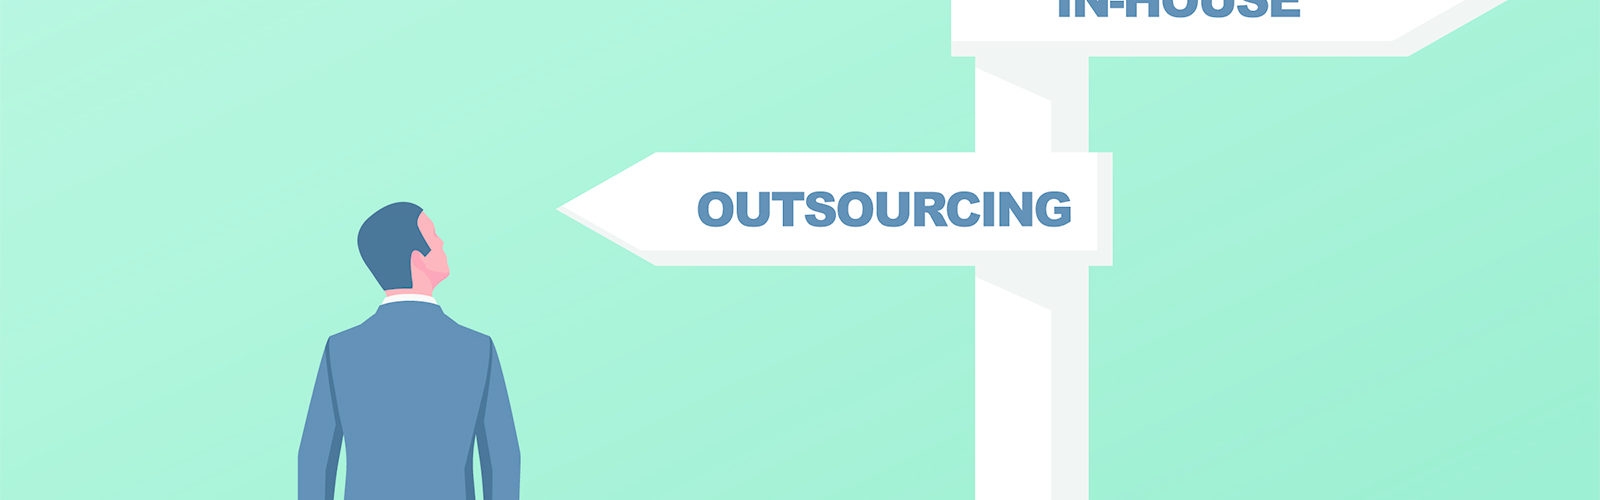 Outsource-Or-Inhouse-Signpost (bs333053860).jpg